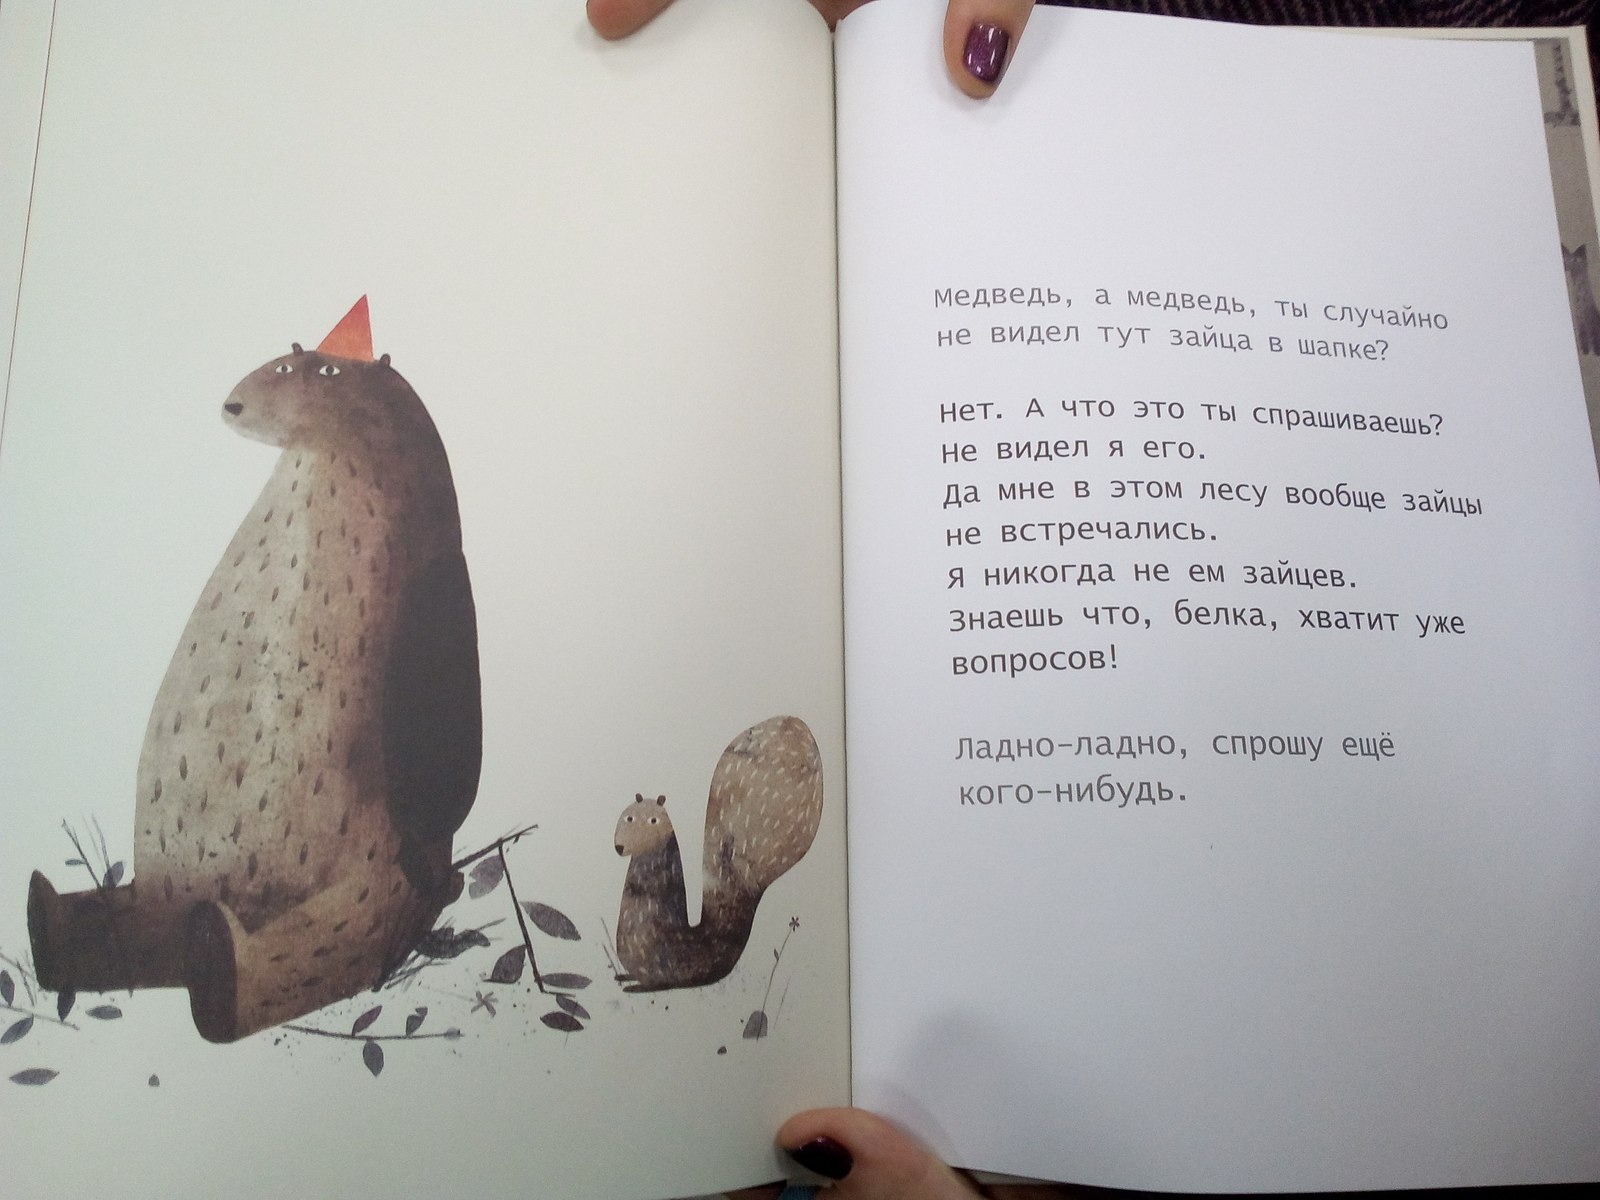 Bestselling children's book translated into 20 languages - Unexpected ending, Longpost, Cap, Animals, Hopelessness, , Game, Books